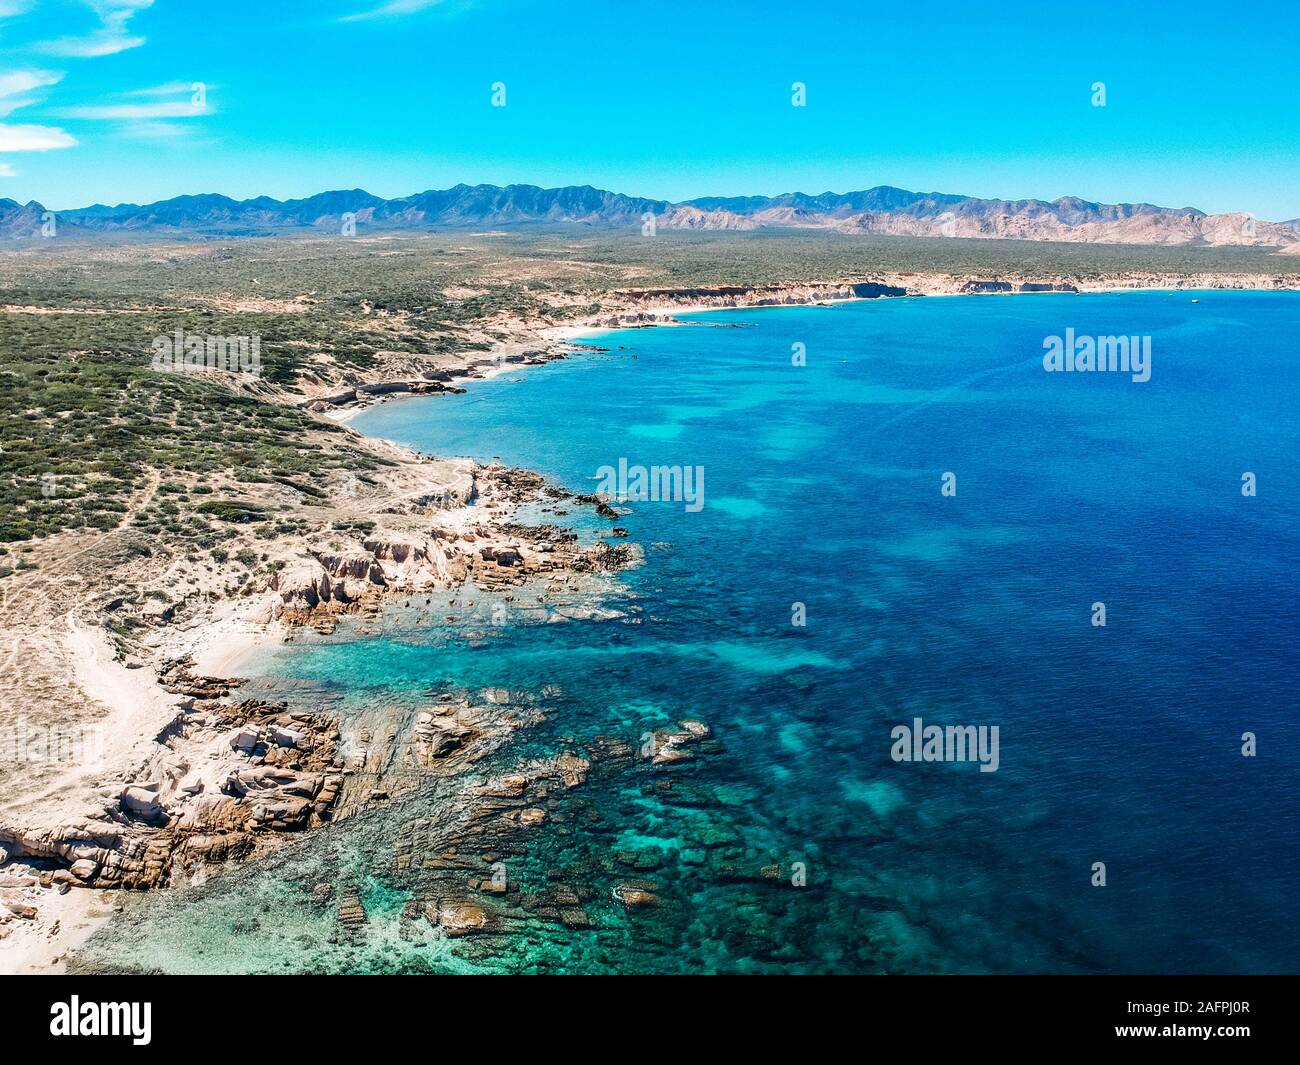 aerial drone view over desert mountains and blue ocean and reef Mexico Stock Photo